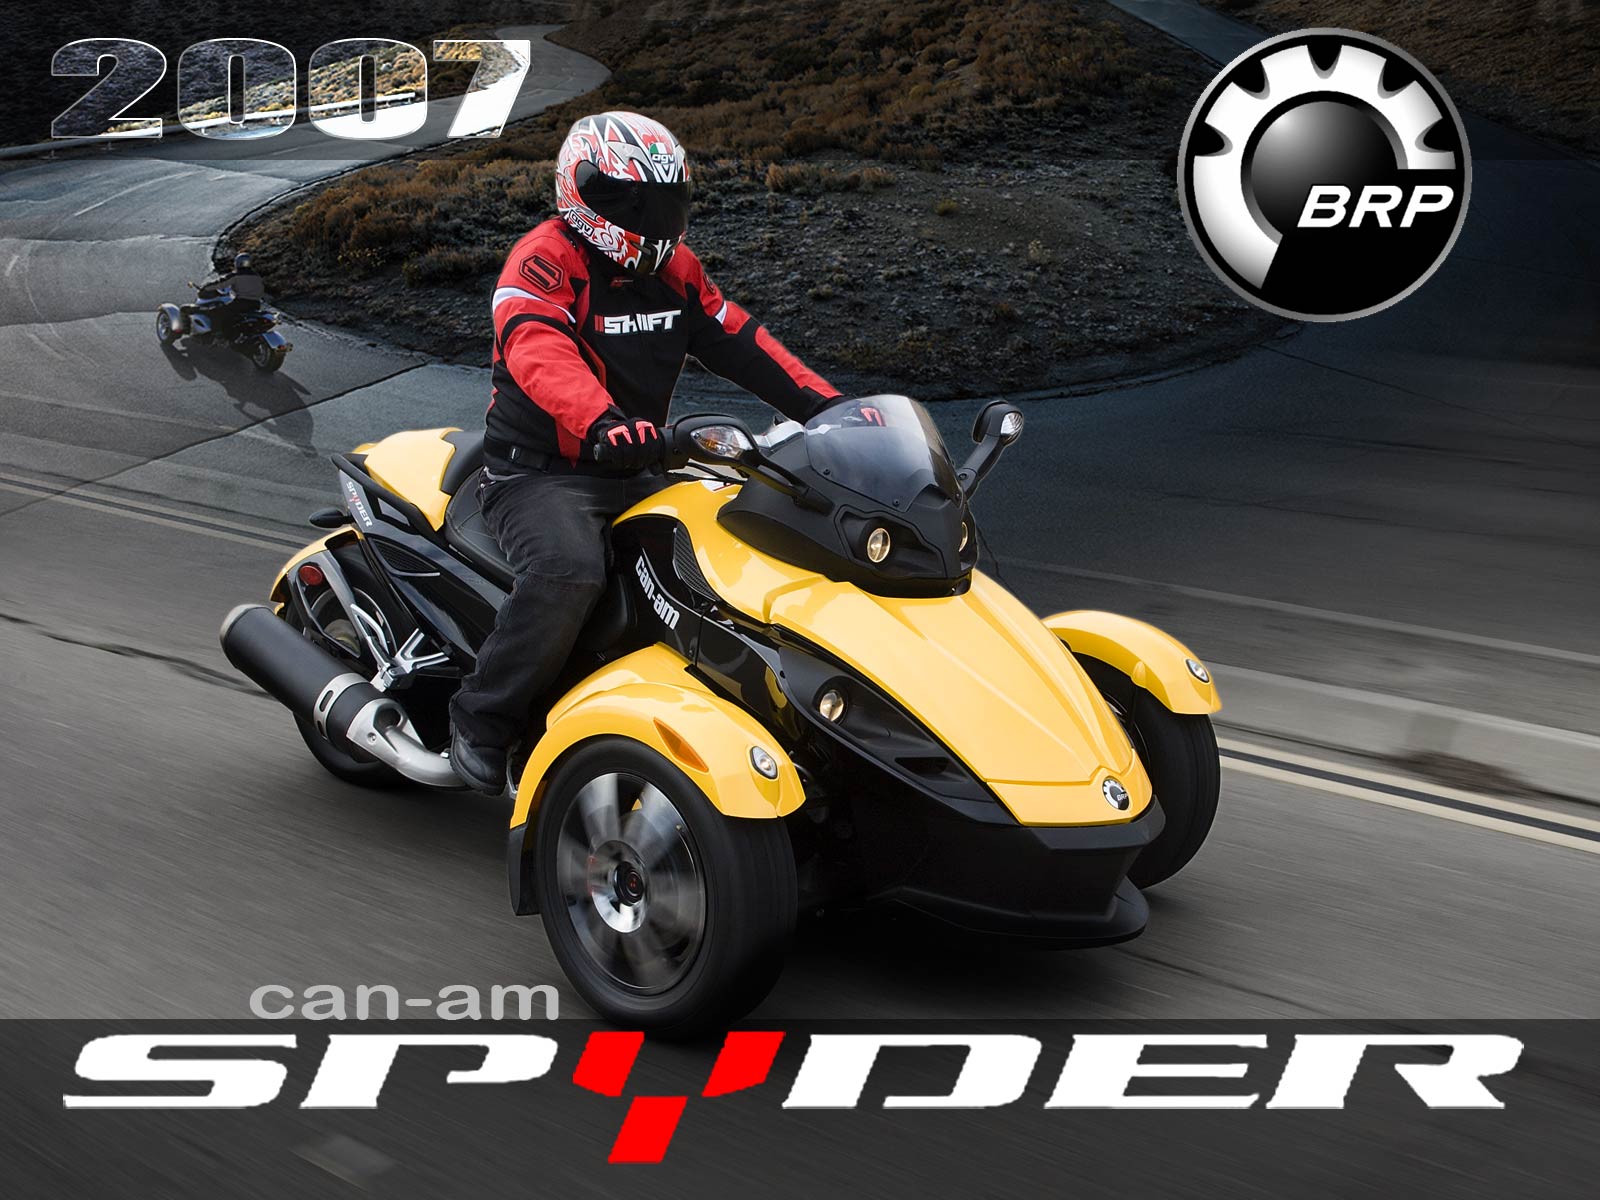 2008 Can-Am Spyder First Ride - Motorcycle USA